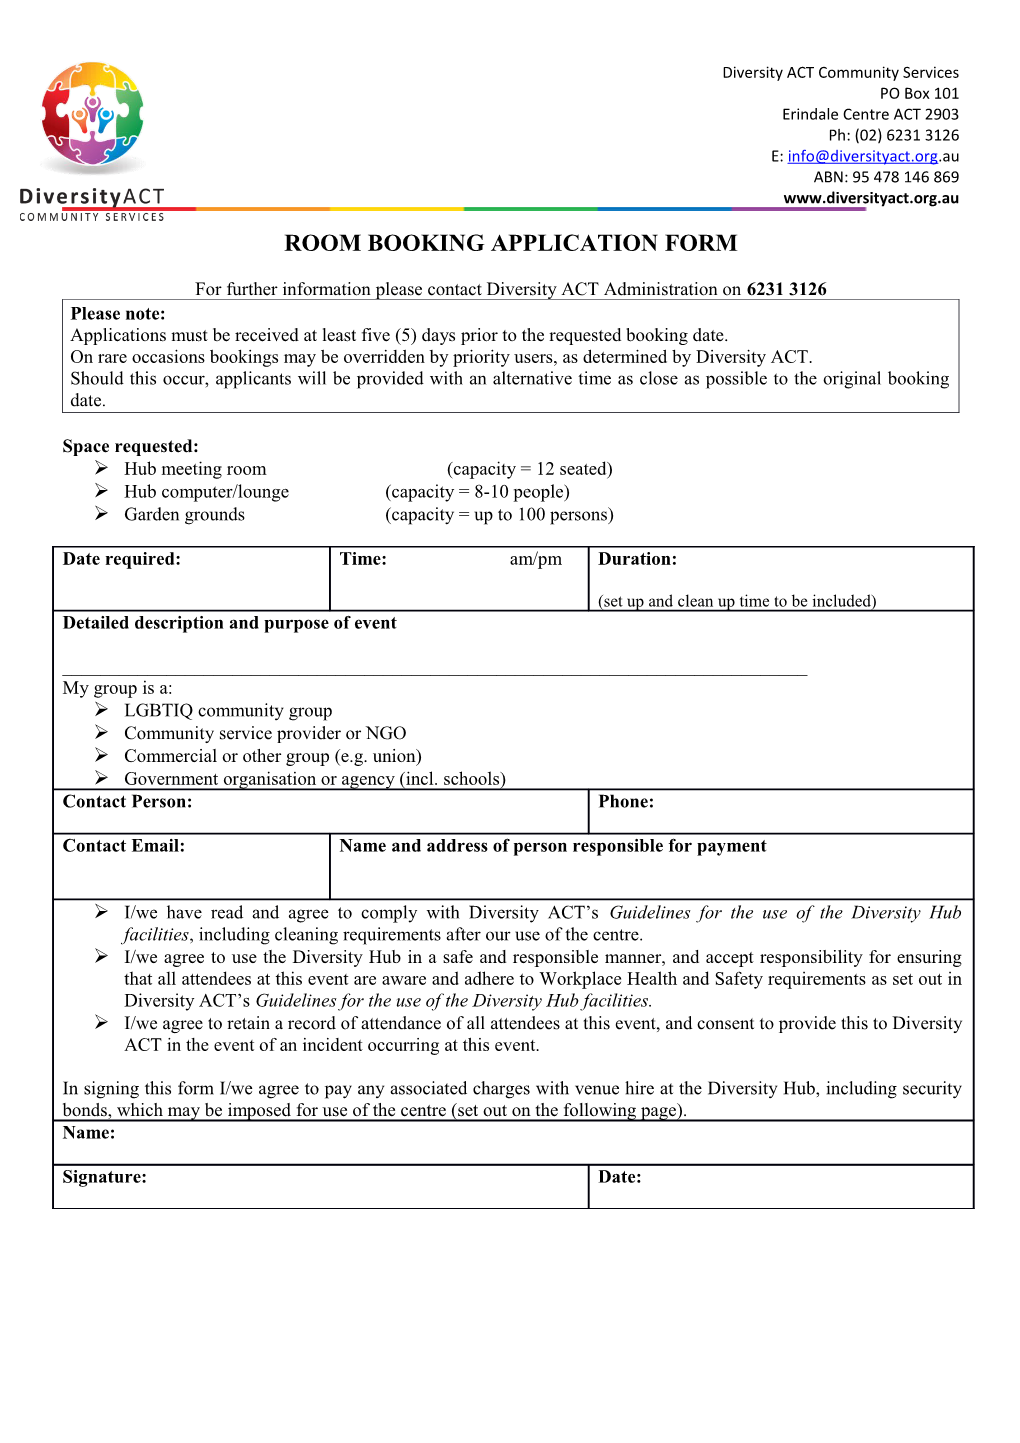 Room Booking Application Form